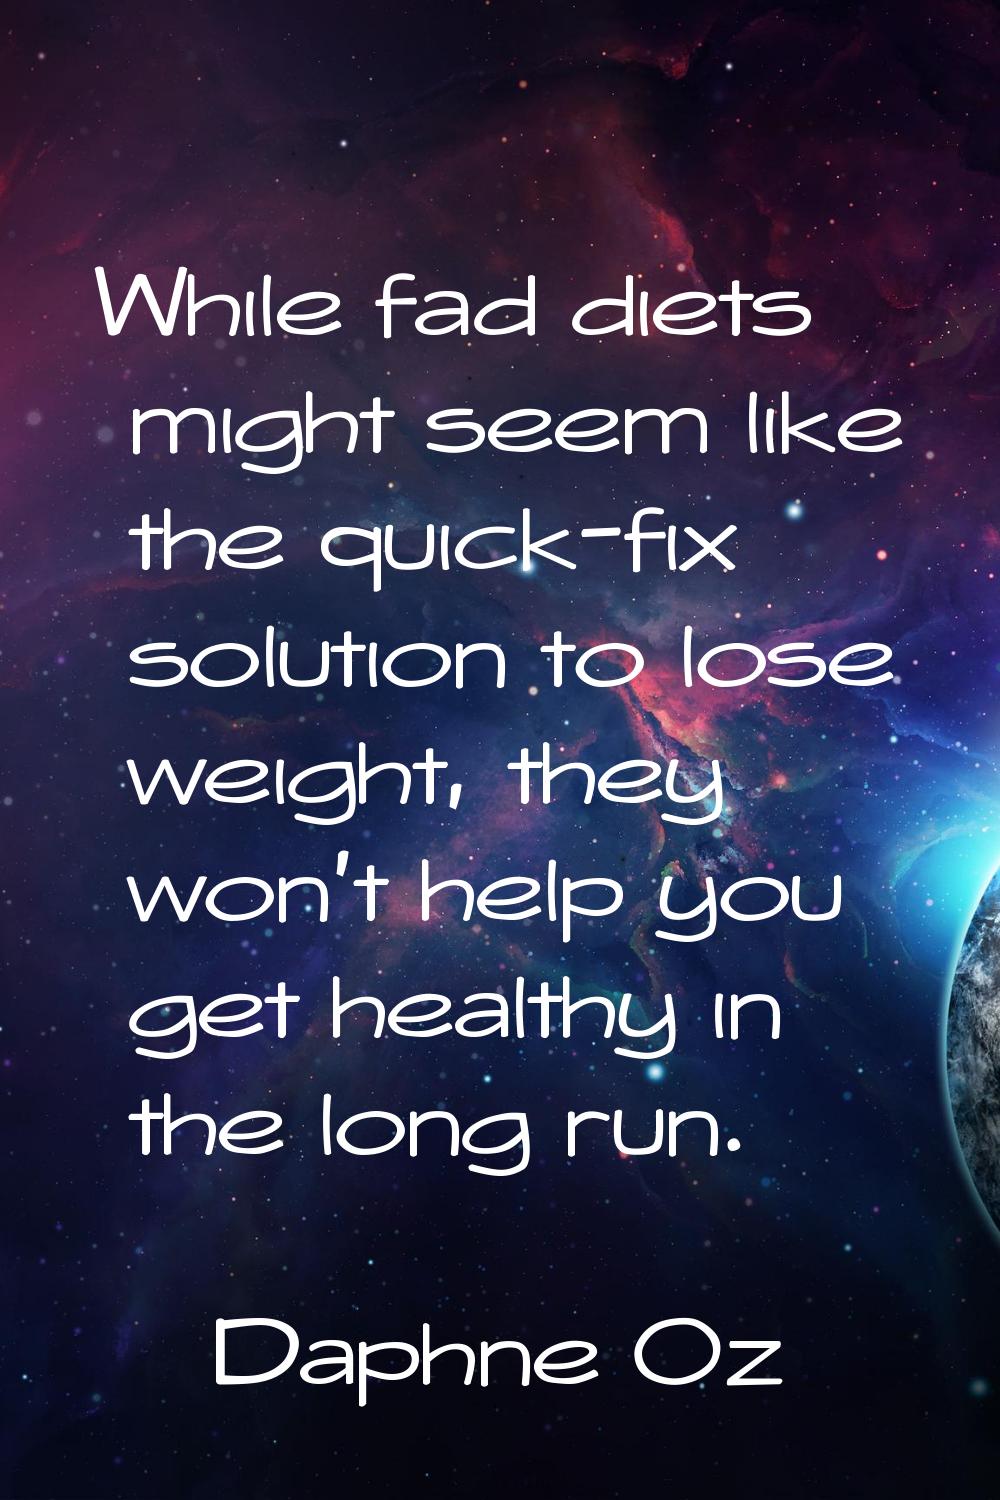 While fad diets might seem like the quick-fix solution to lose weight, they won't help you get heal